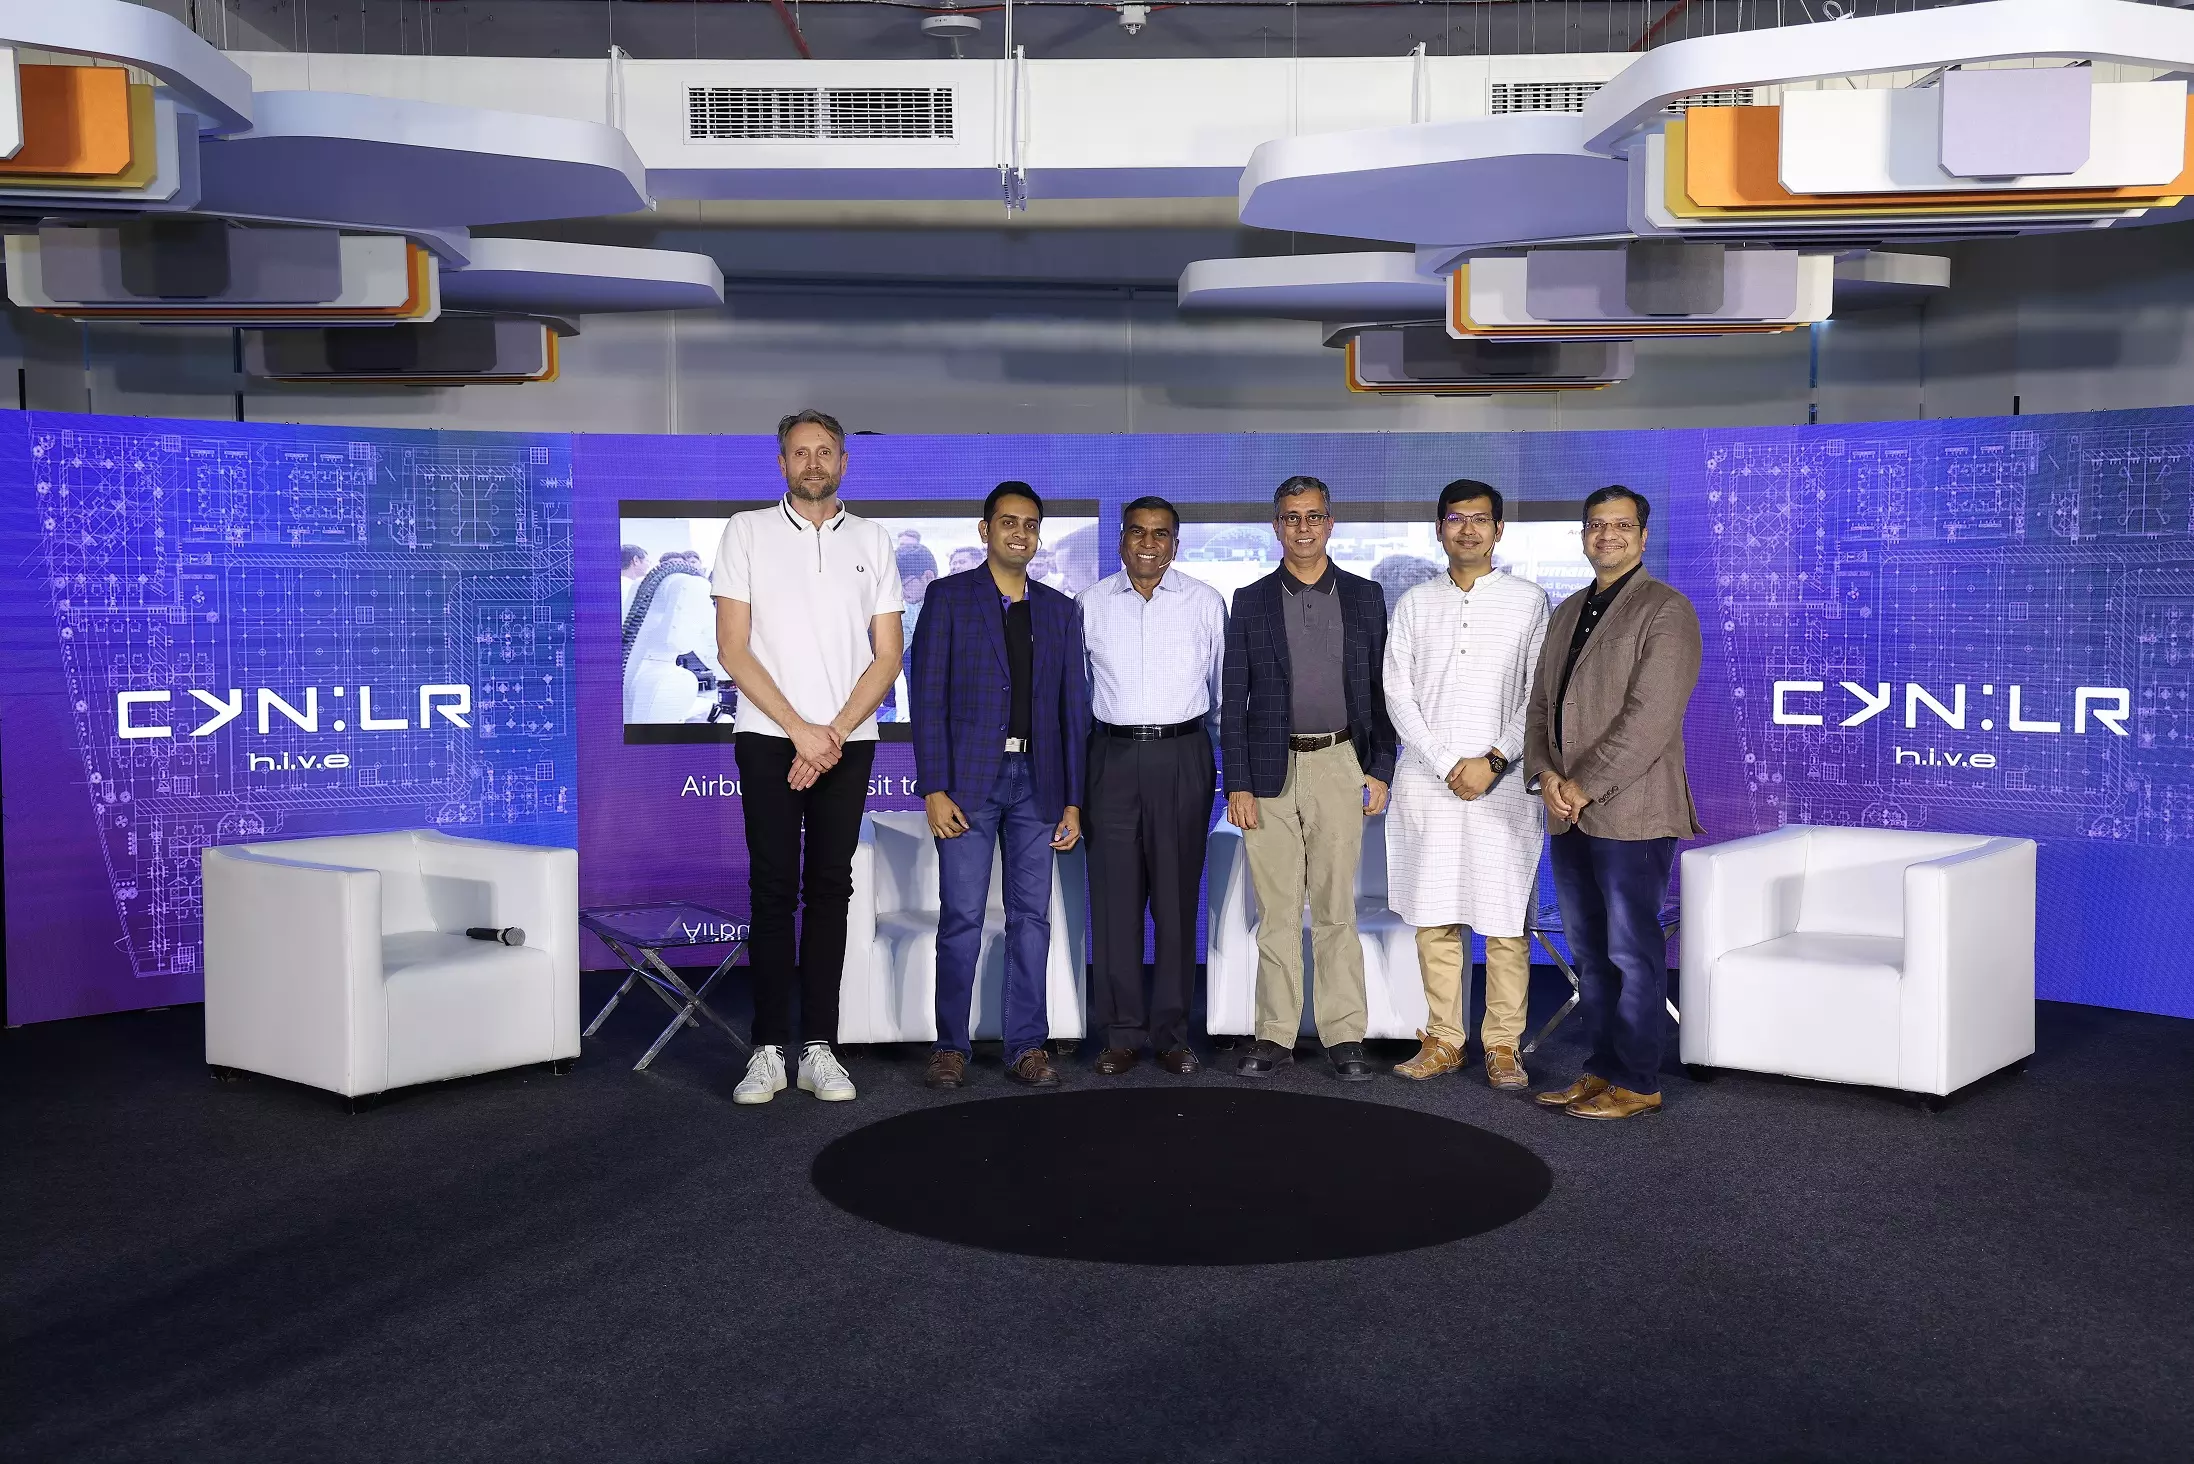 L to R- Sven Schreiner, Global Key Account Manager, Mojin Robotics, Nikhil Ramaswamy, Co-Founder, CEO, CynLr, M M Murugappan, Chairman of the boards of CUMI Ltd, Cyient Ltd & Director at IIT Madras Research Park, Ajay Gopalaswamy, CEO at DiFACTO Robotics and Automation, Gokul NA, Founder, Design, Product & Brand, CynLr and Rama Bethmangalakar, Director at Qualcomm Ventures